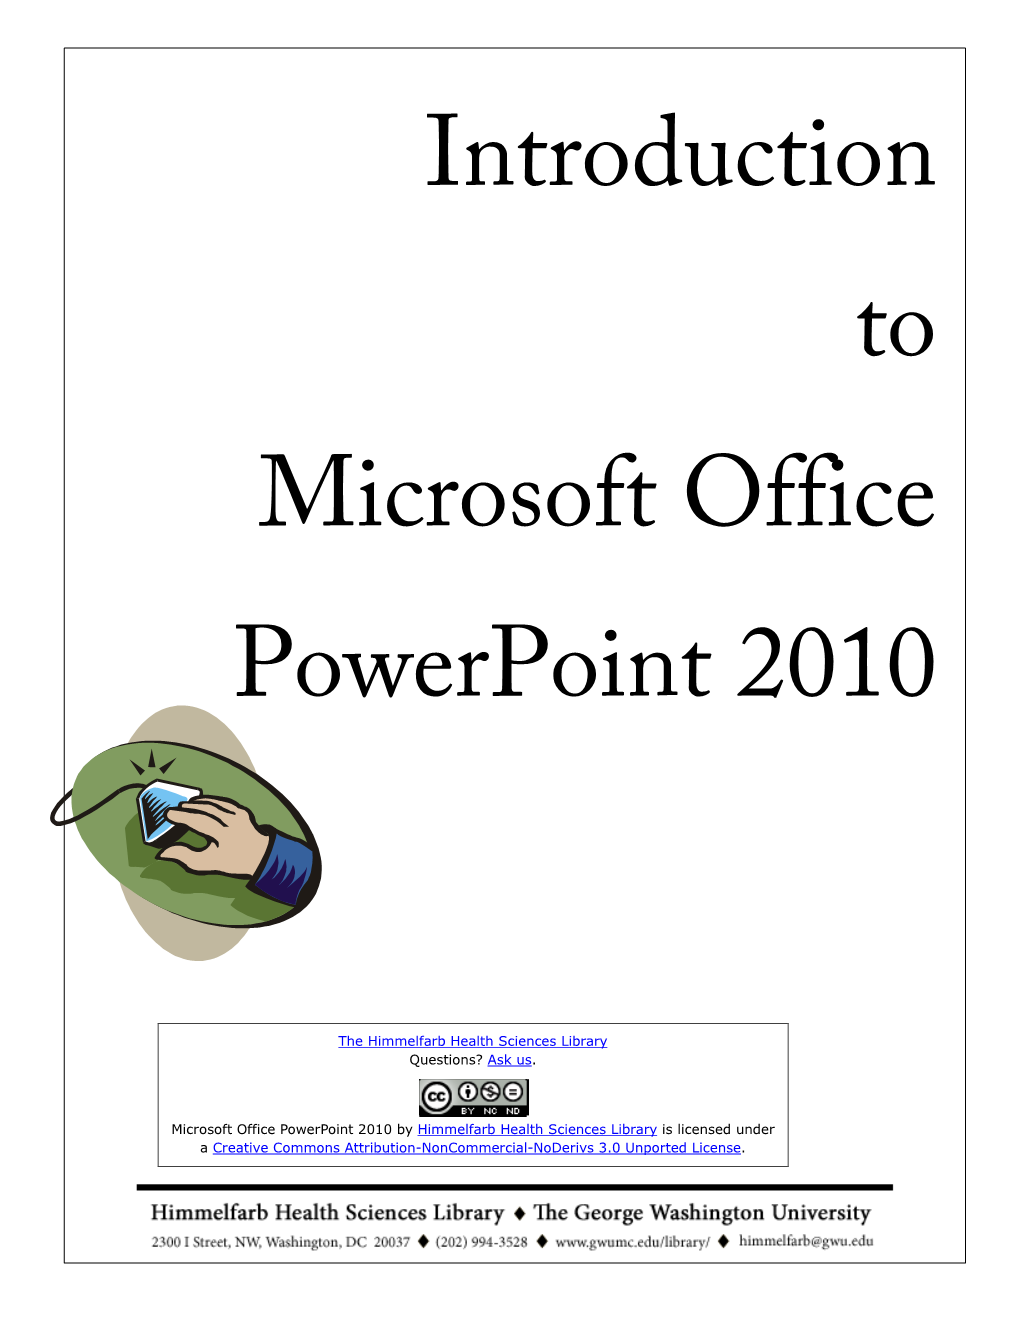 Introduction to Microsoft Office Powerpoint 2010